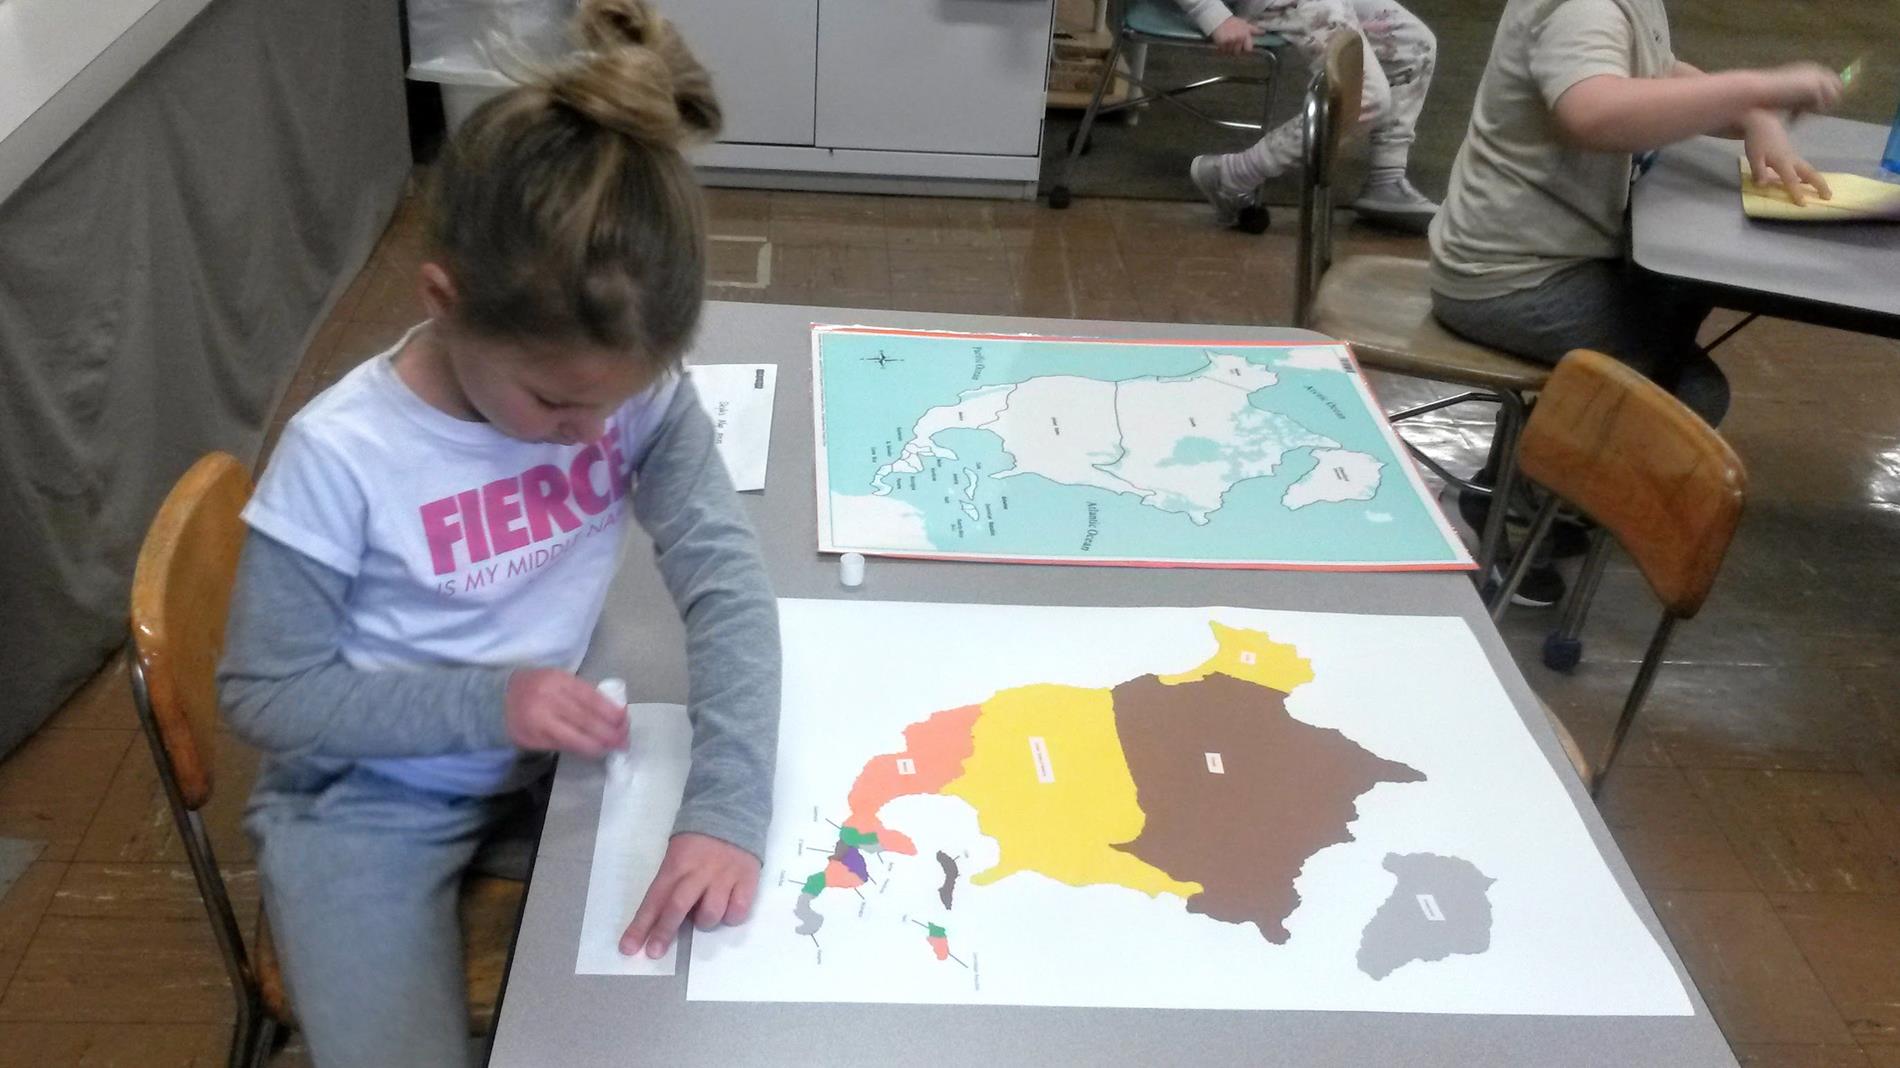 Child working on a map of North America